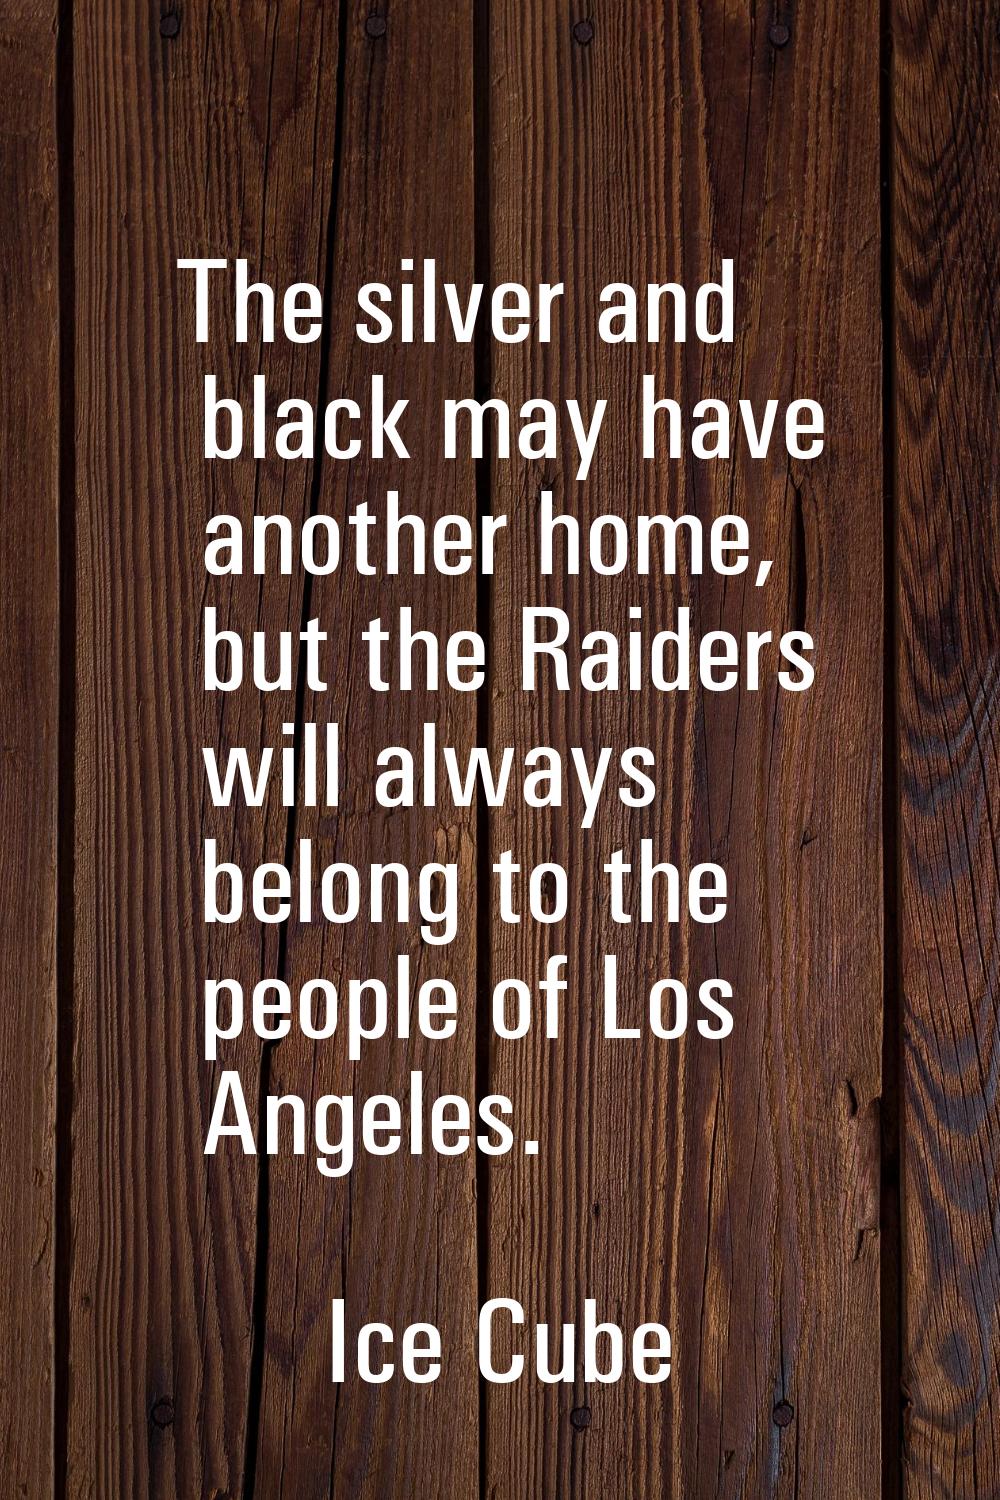 The silver and black may have another home, but the Raiders will always belong to the people of Los